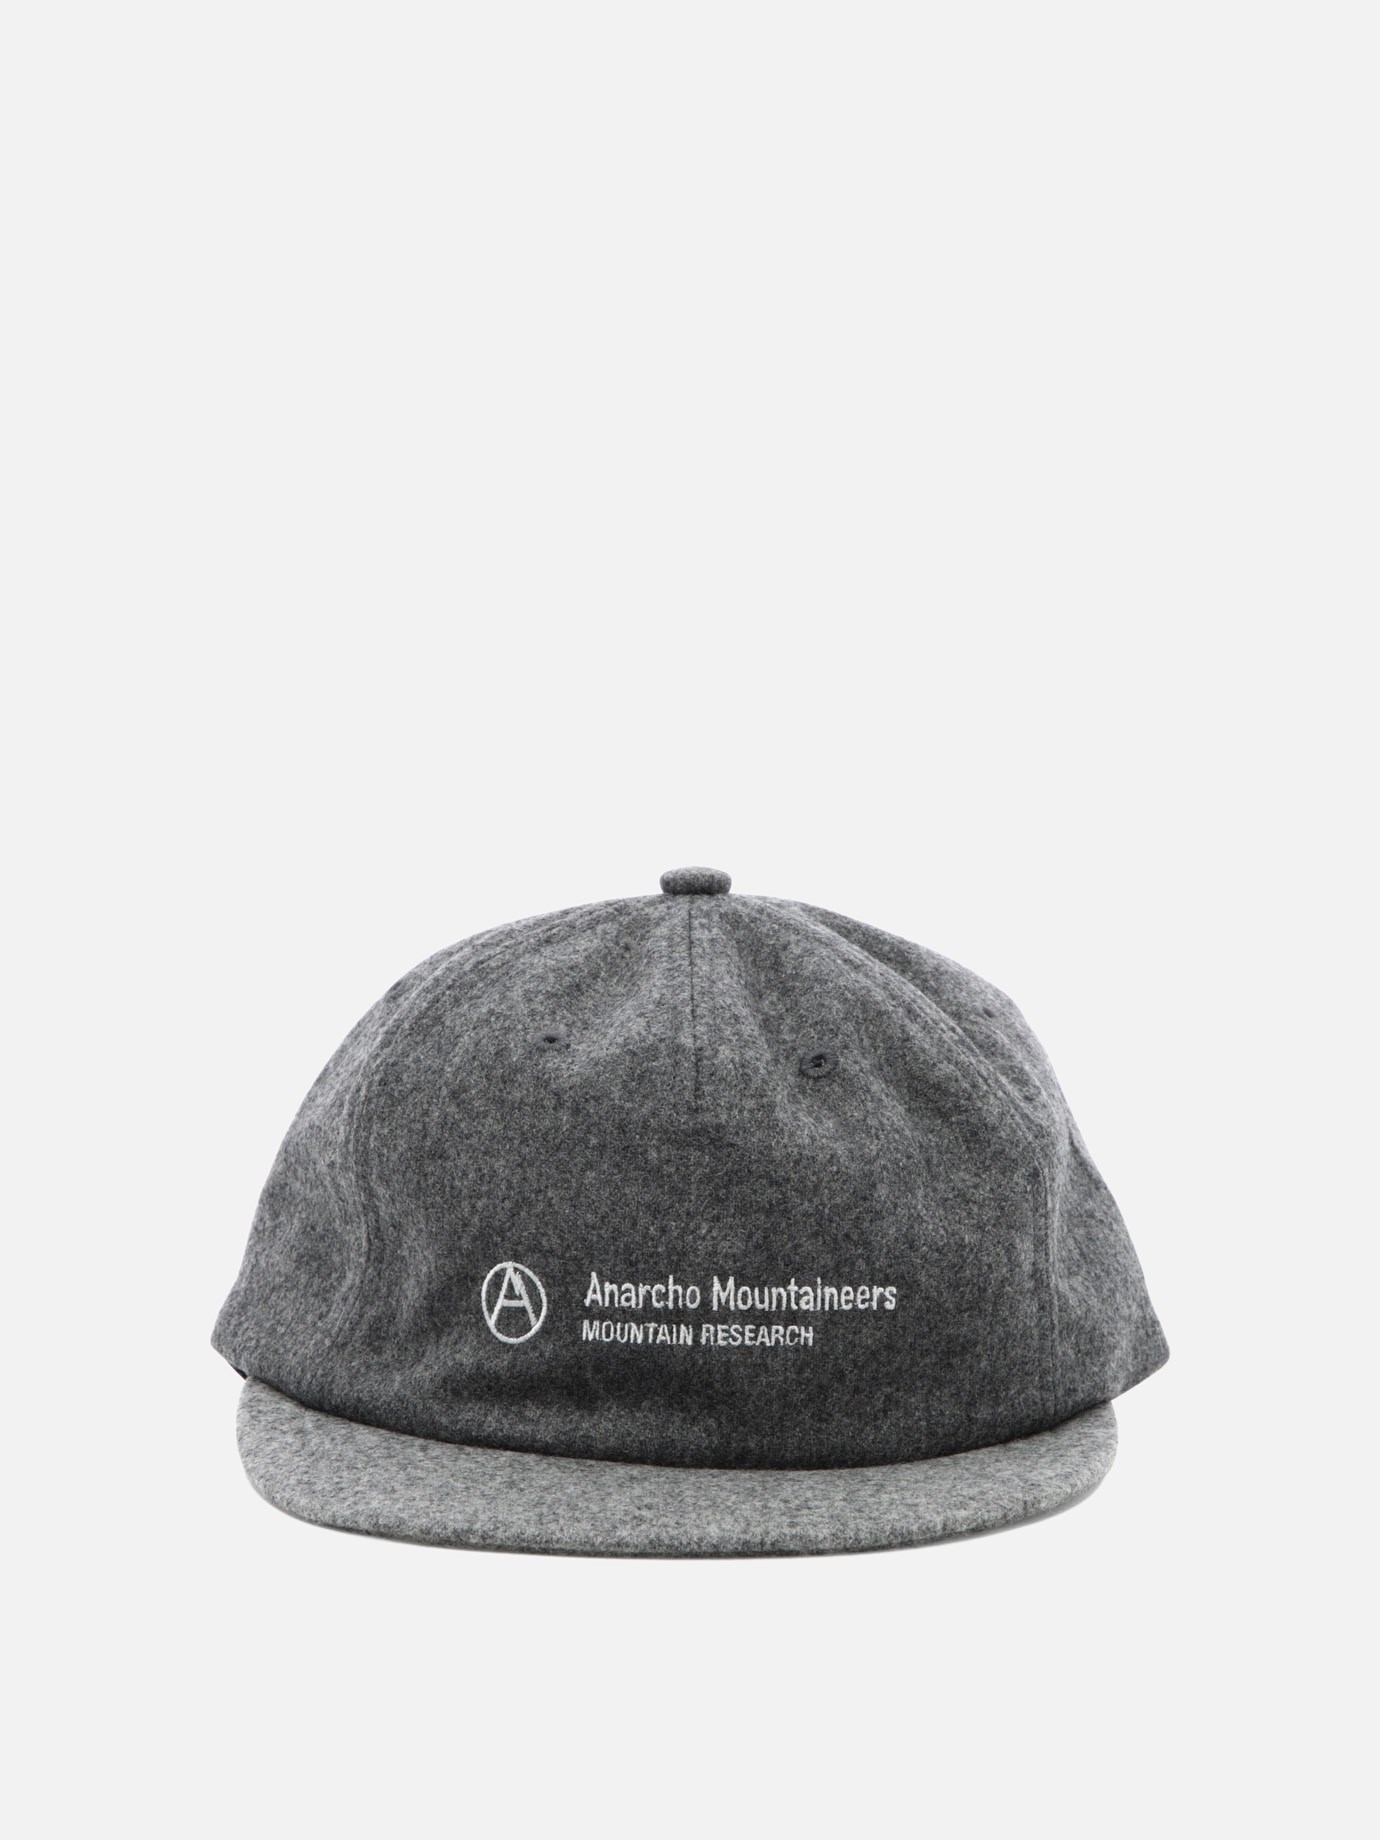 Cappello trucker  MT Cap  by Mountain Research